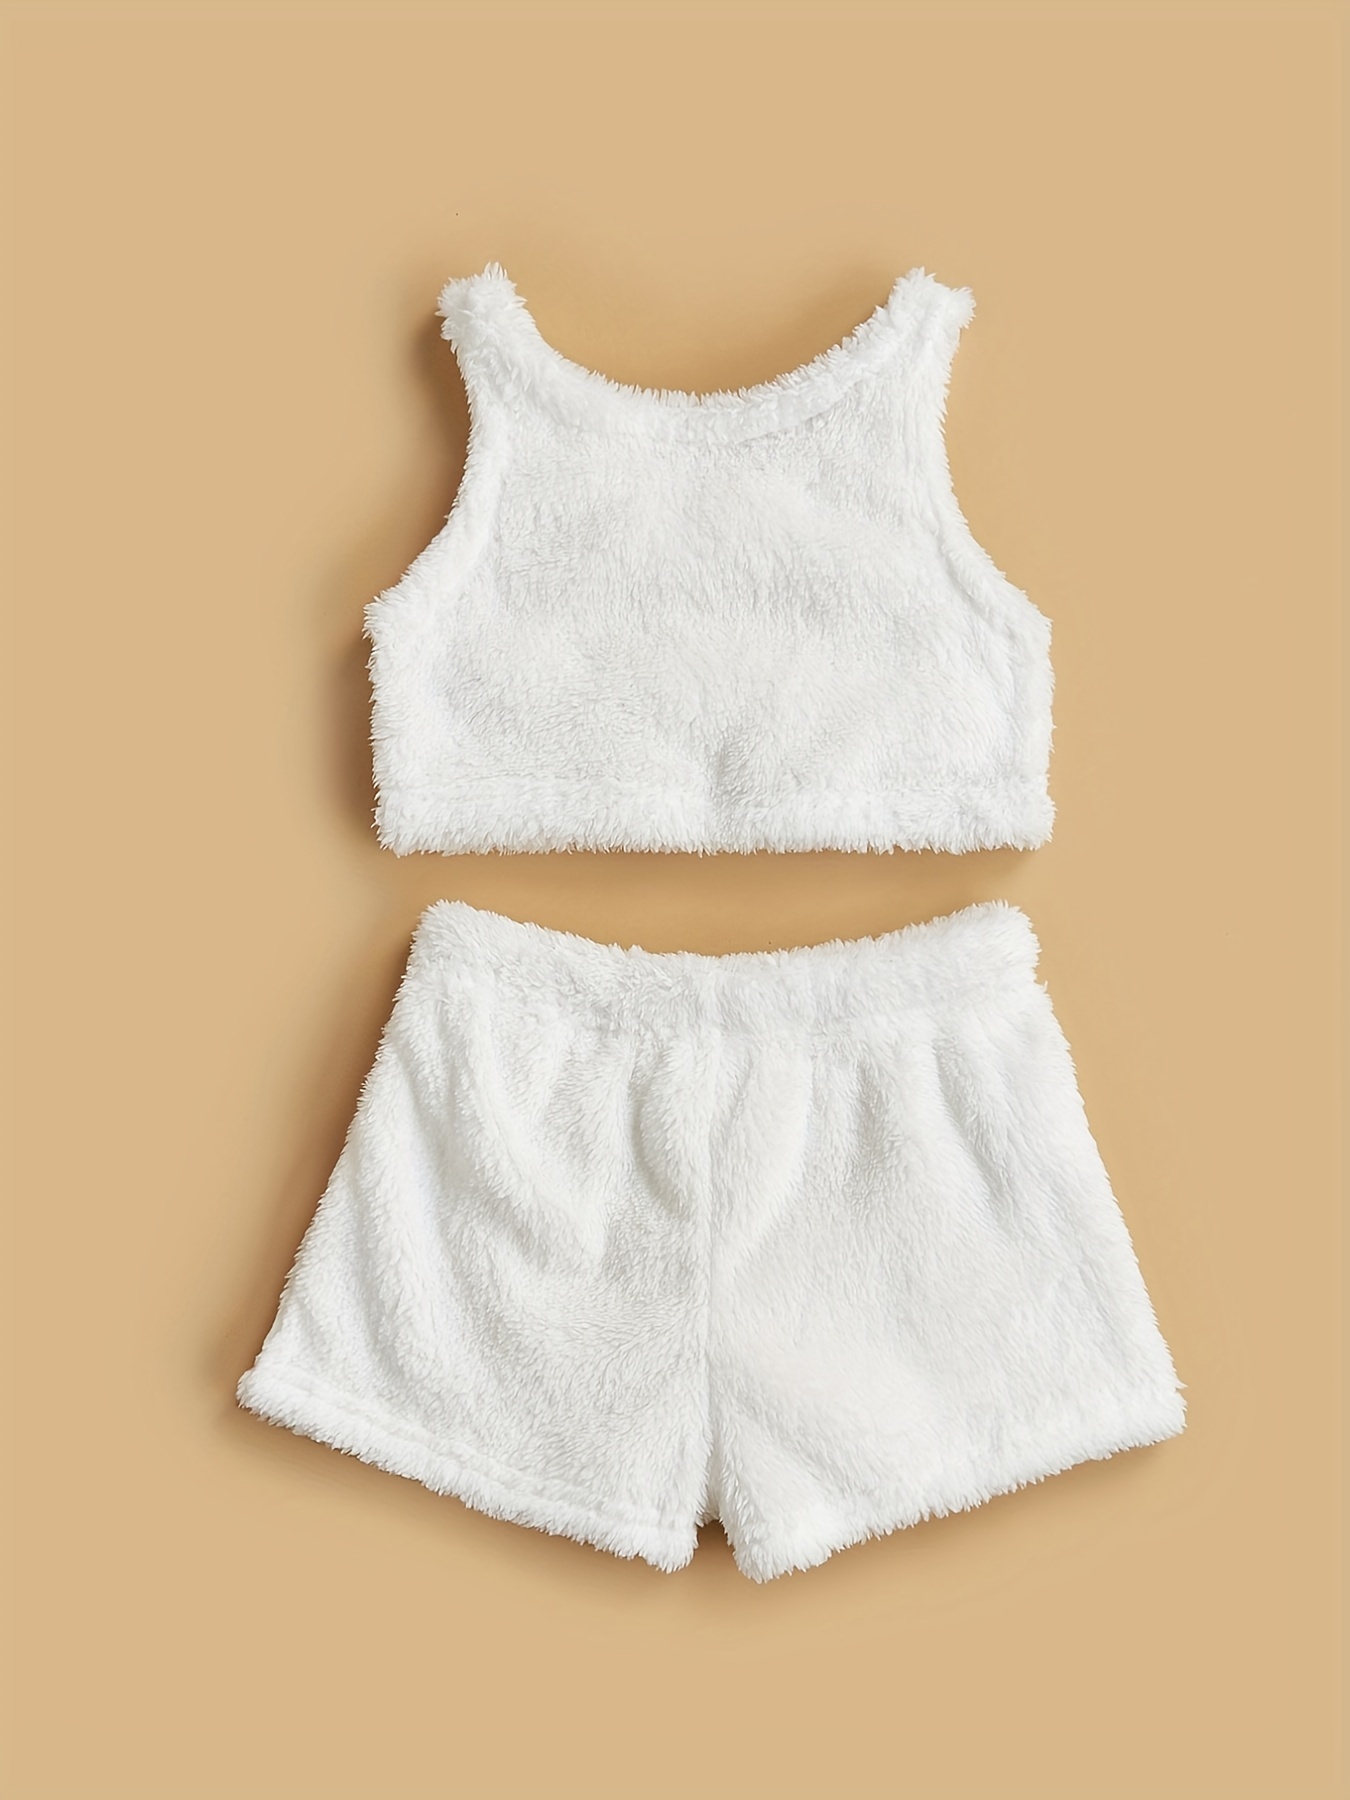 Shein Kids Girls 2T Top and Shorts Outfit